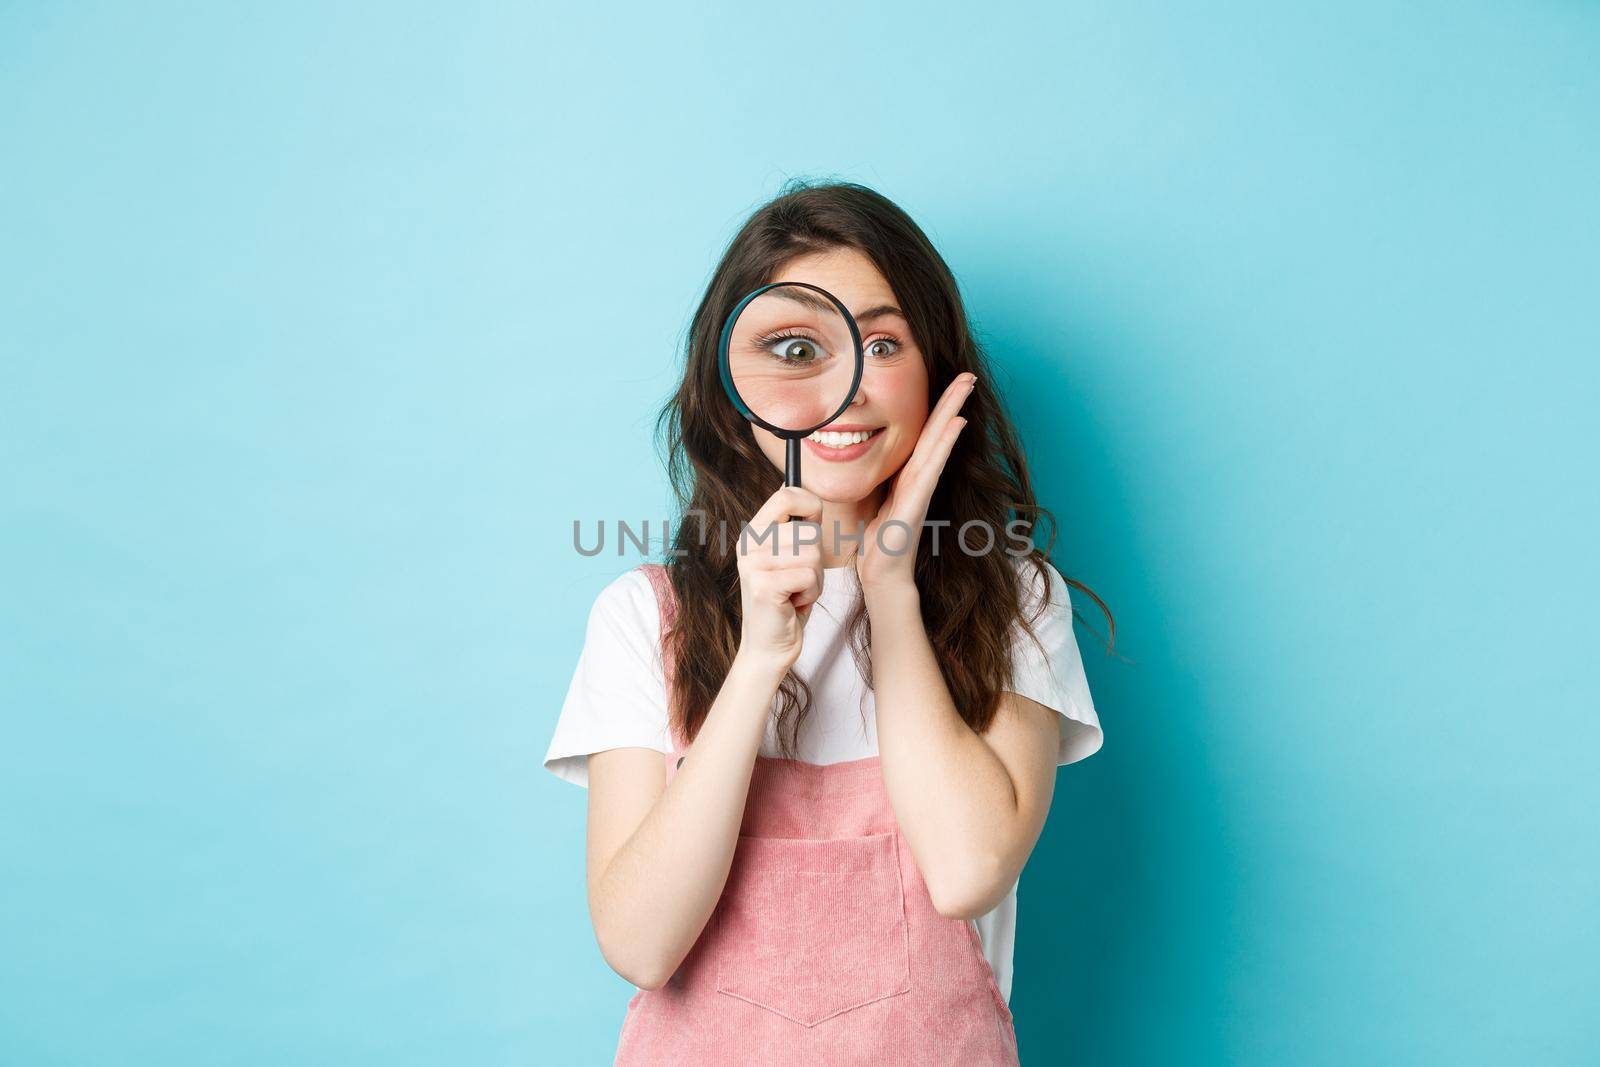 Girl searching for you. Cute smiling woman recruiter look through magnifying glass, staring at camera, investigating, looking for someone, standing over blue background.